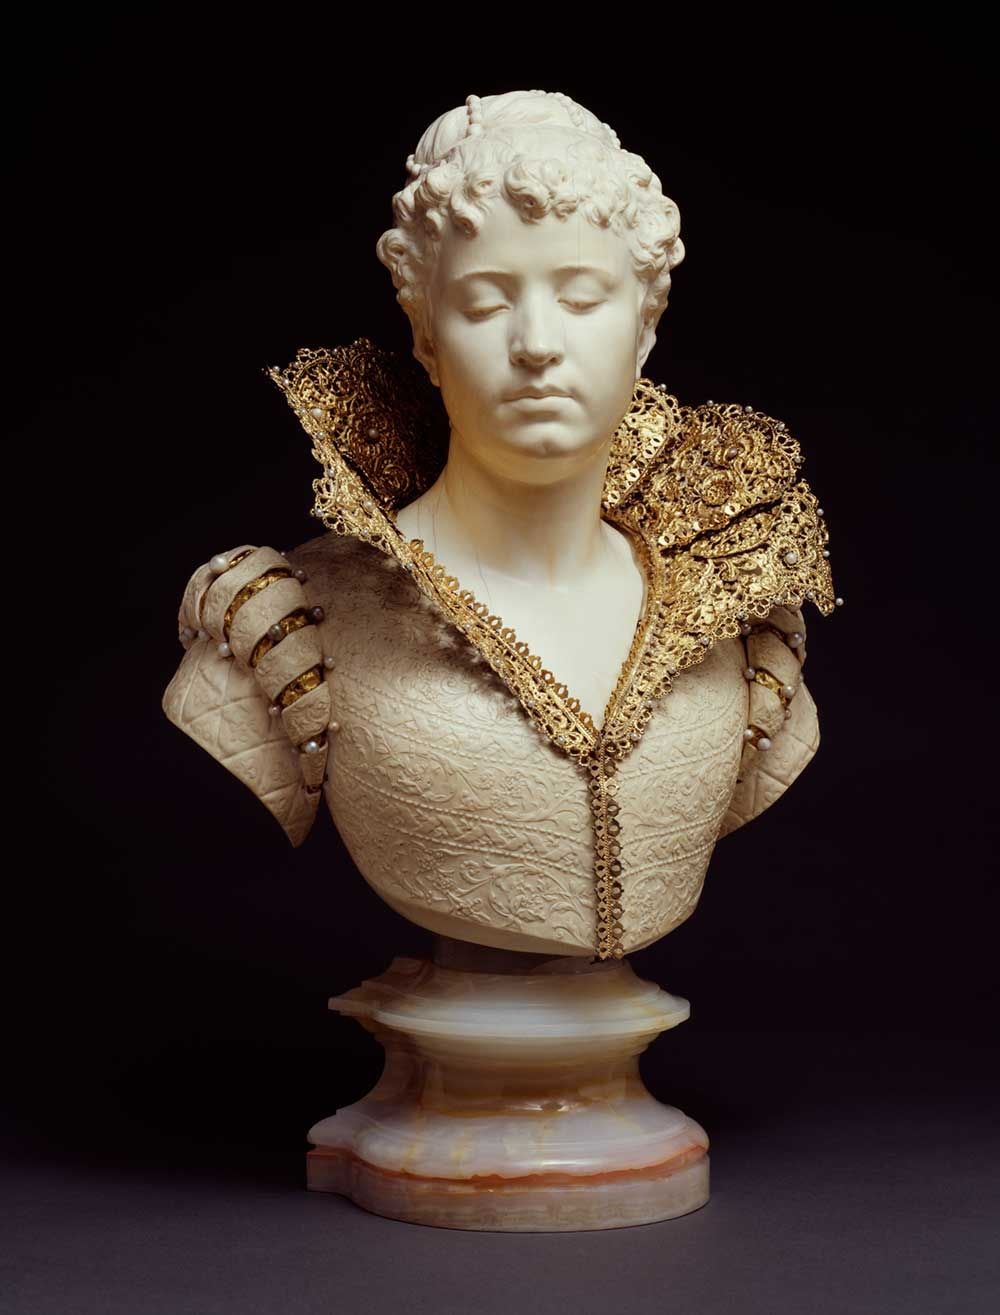 Augustin Jean Moreau-Vauthier [Father], A Florentine Lady, c. 1892, ivory, gilt on silver, pearls, onyx, 17.9 inches